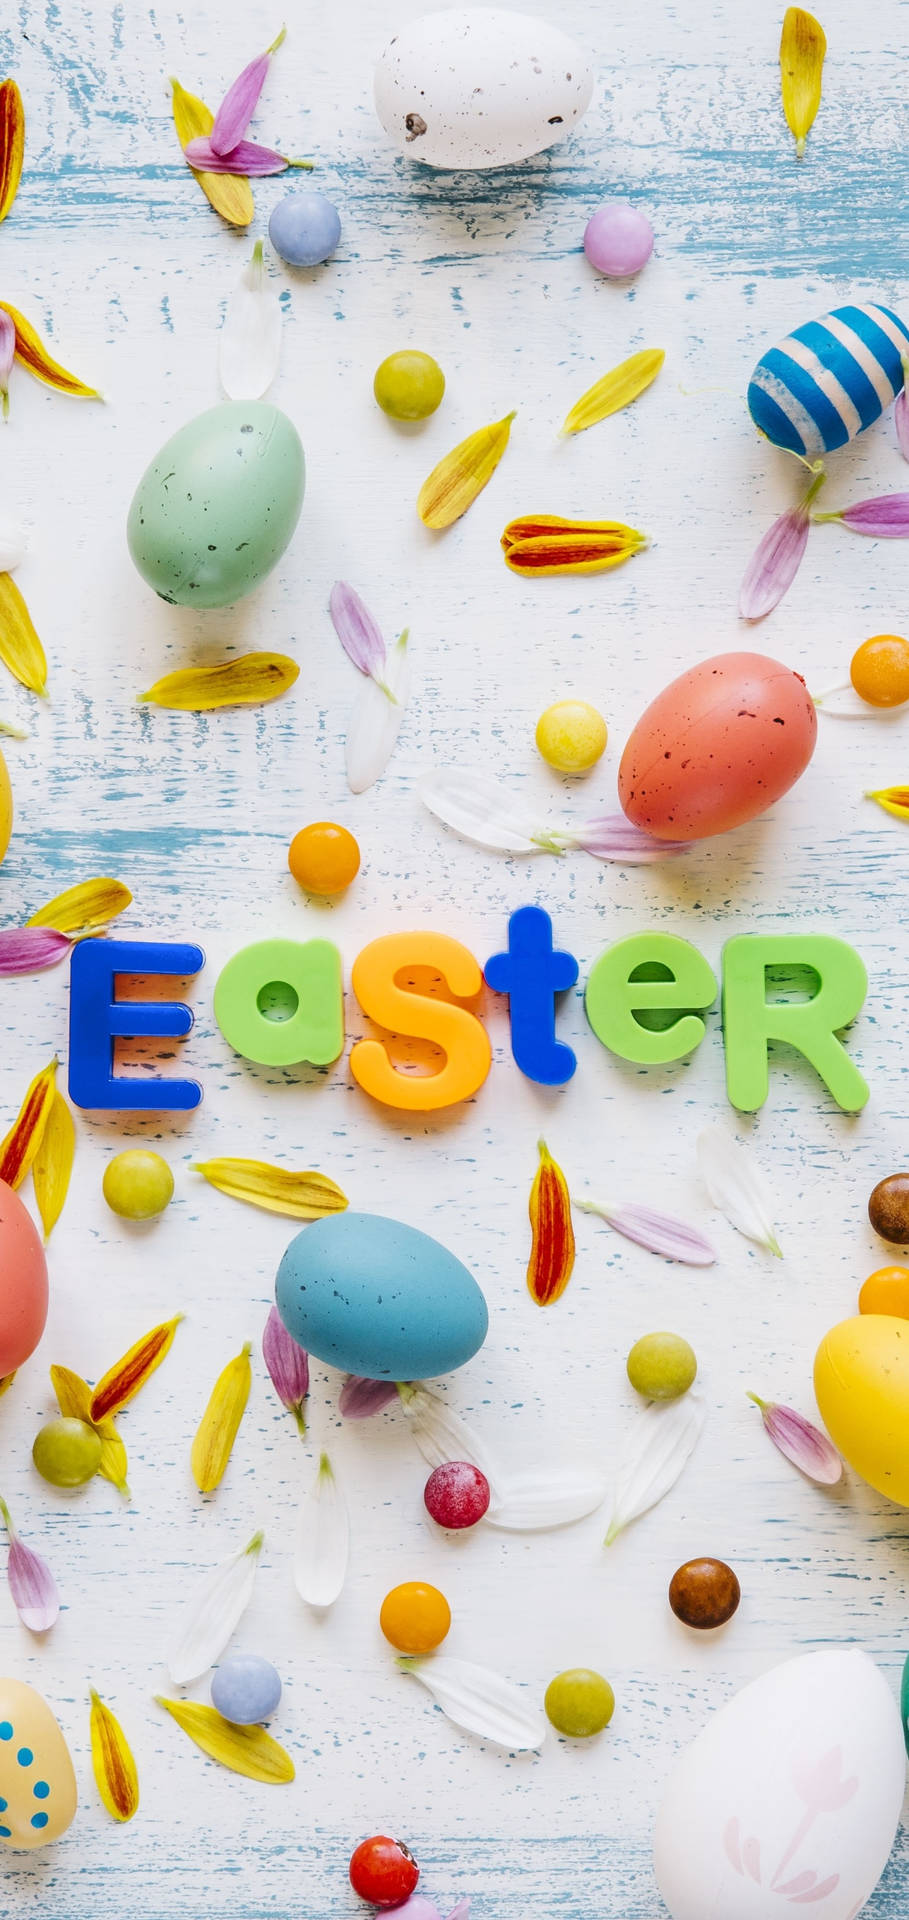 Easter Colorful Letters Phone Wallpaper